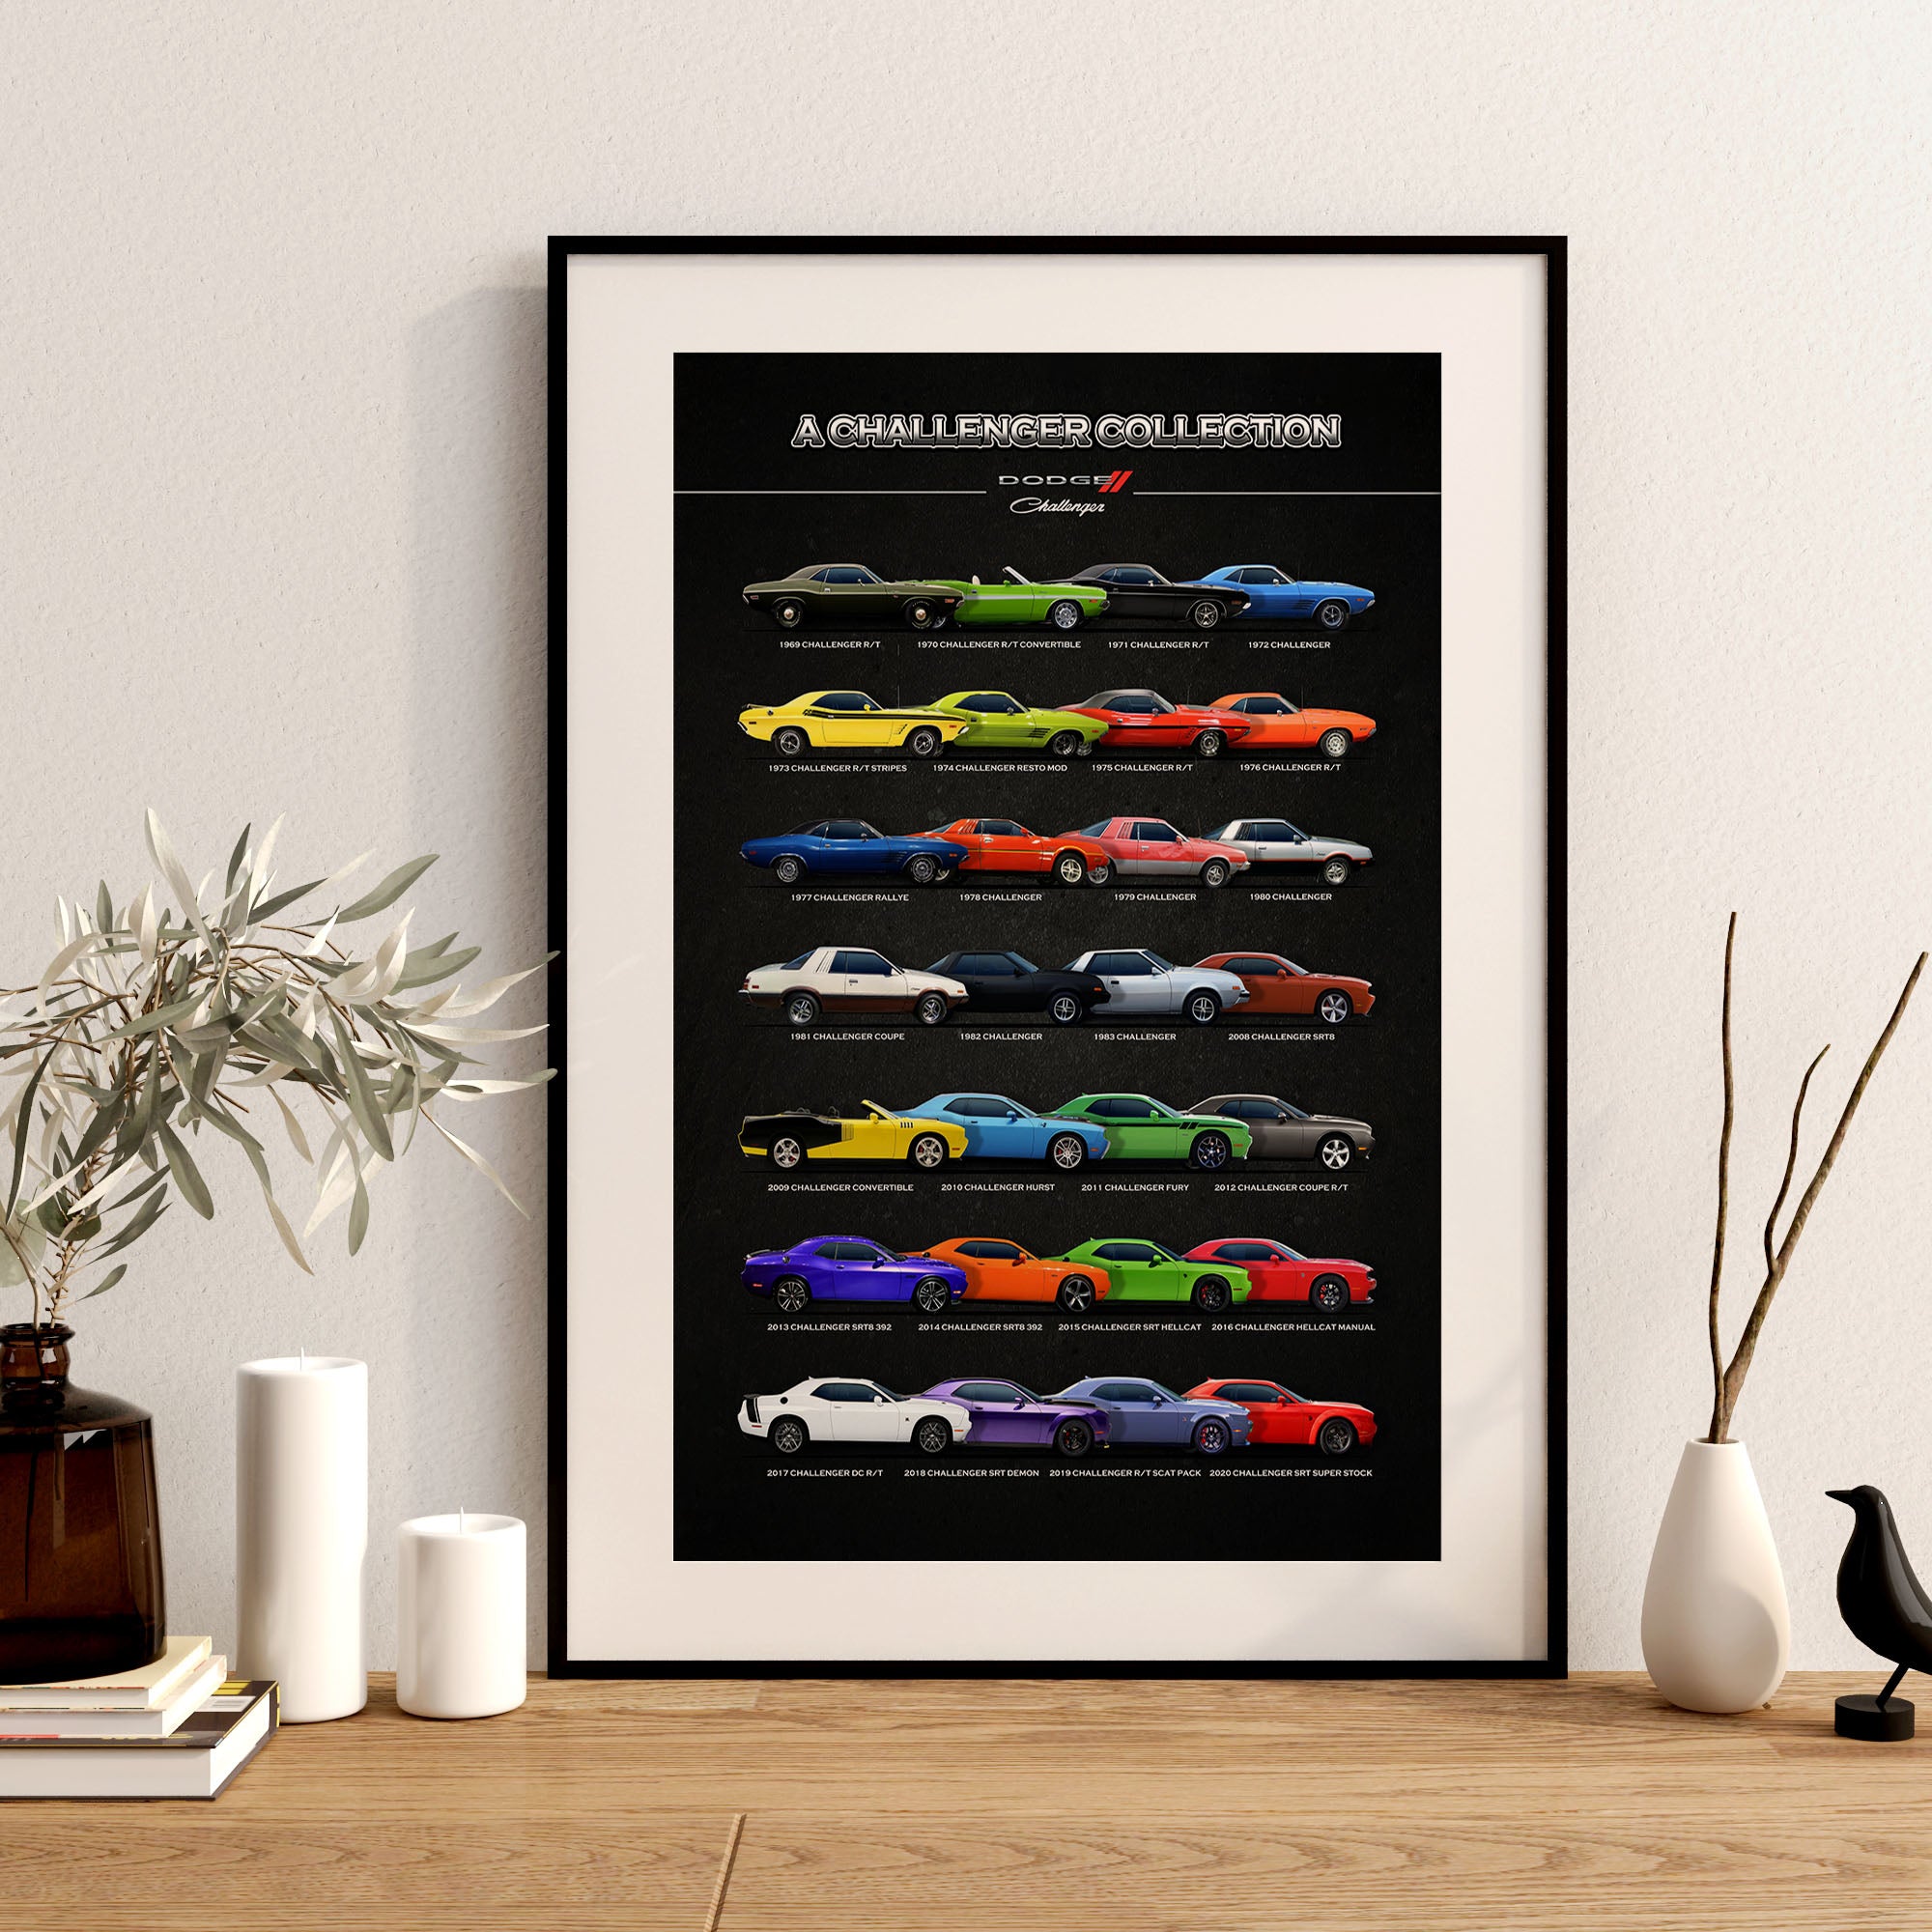 Challenger Art Poster - A Collection Of All Iconic Challengers